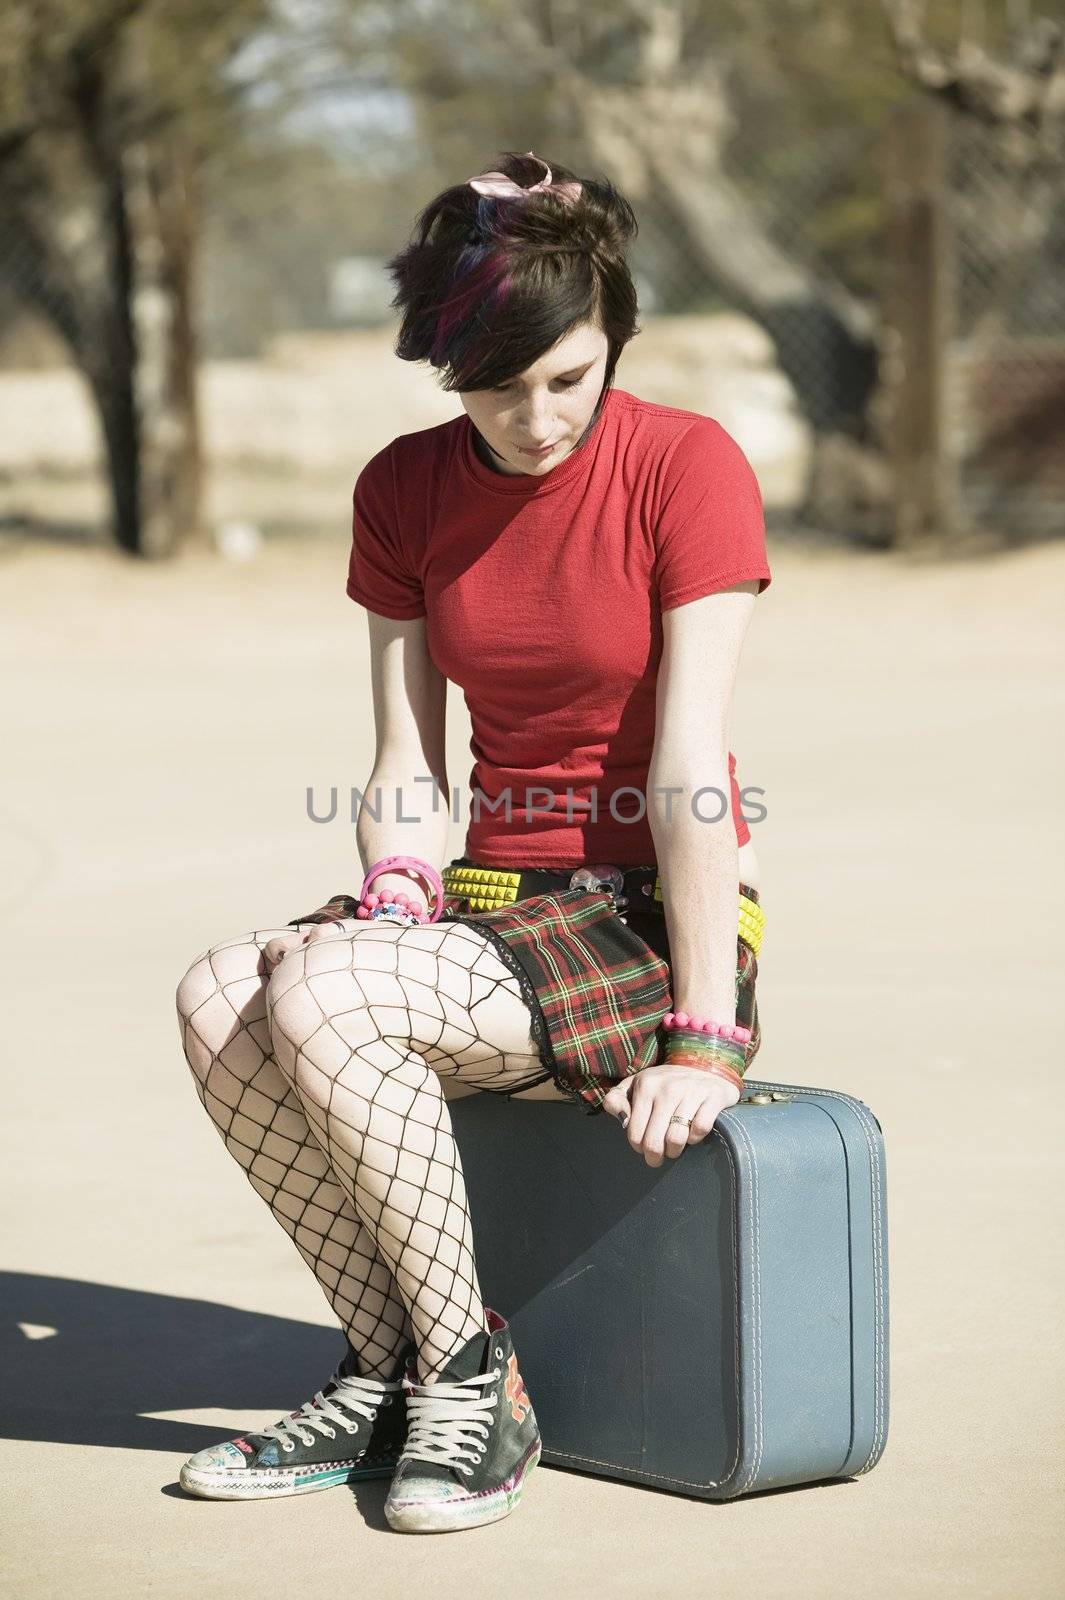 Punk Girl Sitting on Suitcase by Creatista